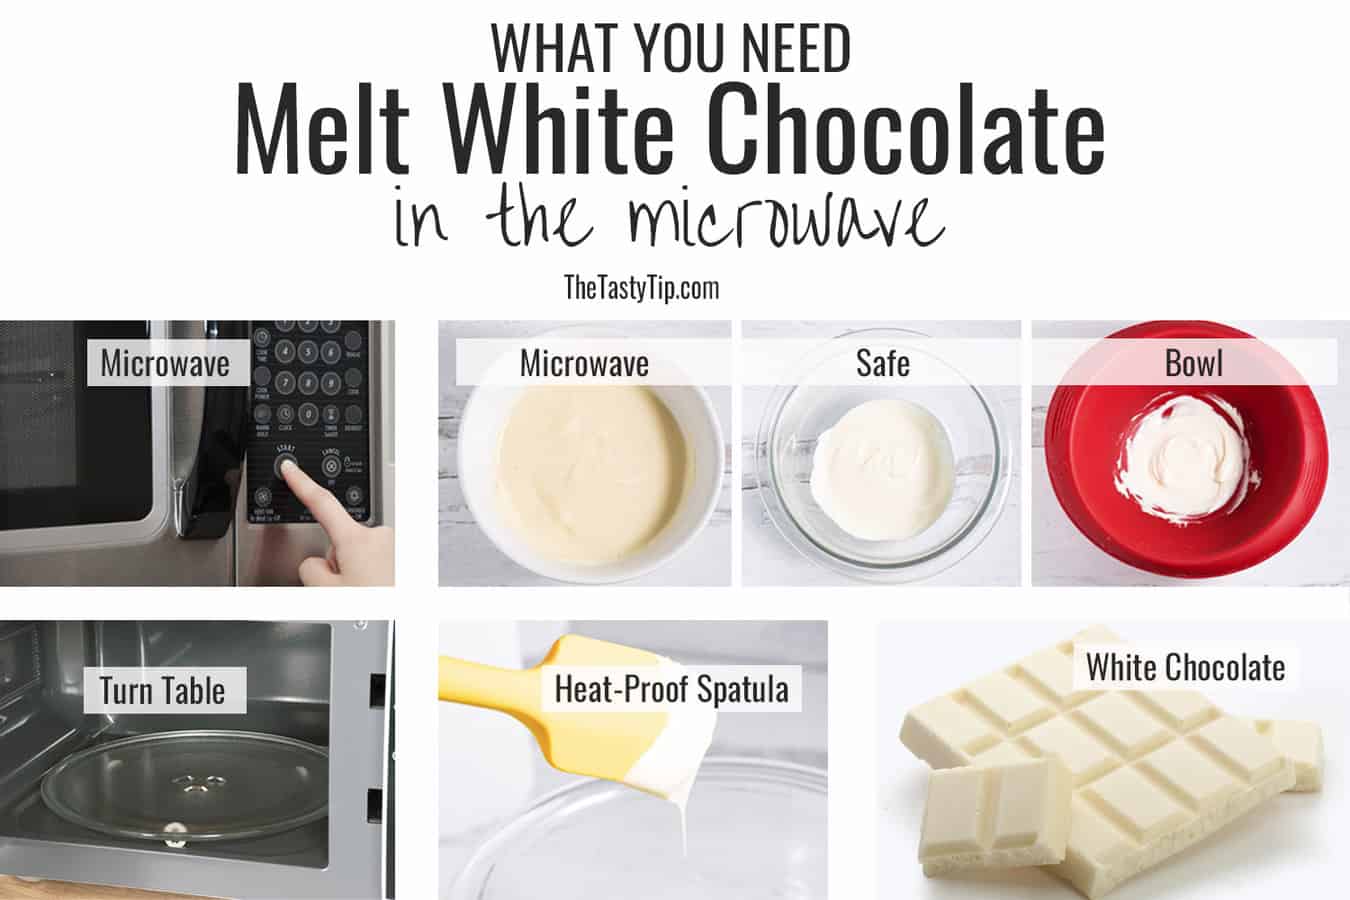 Supplies to melt white chocolate in the microwave.